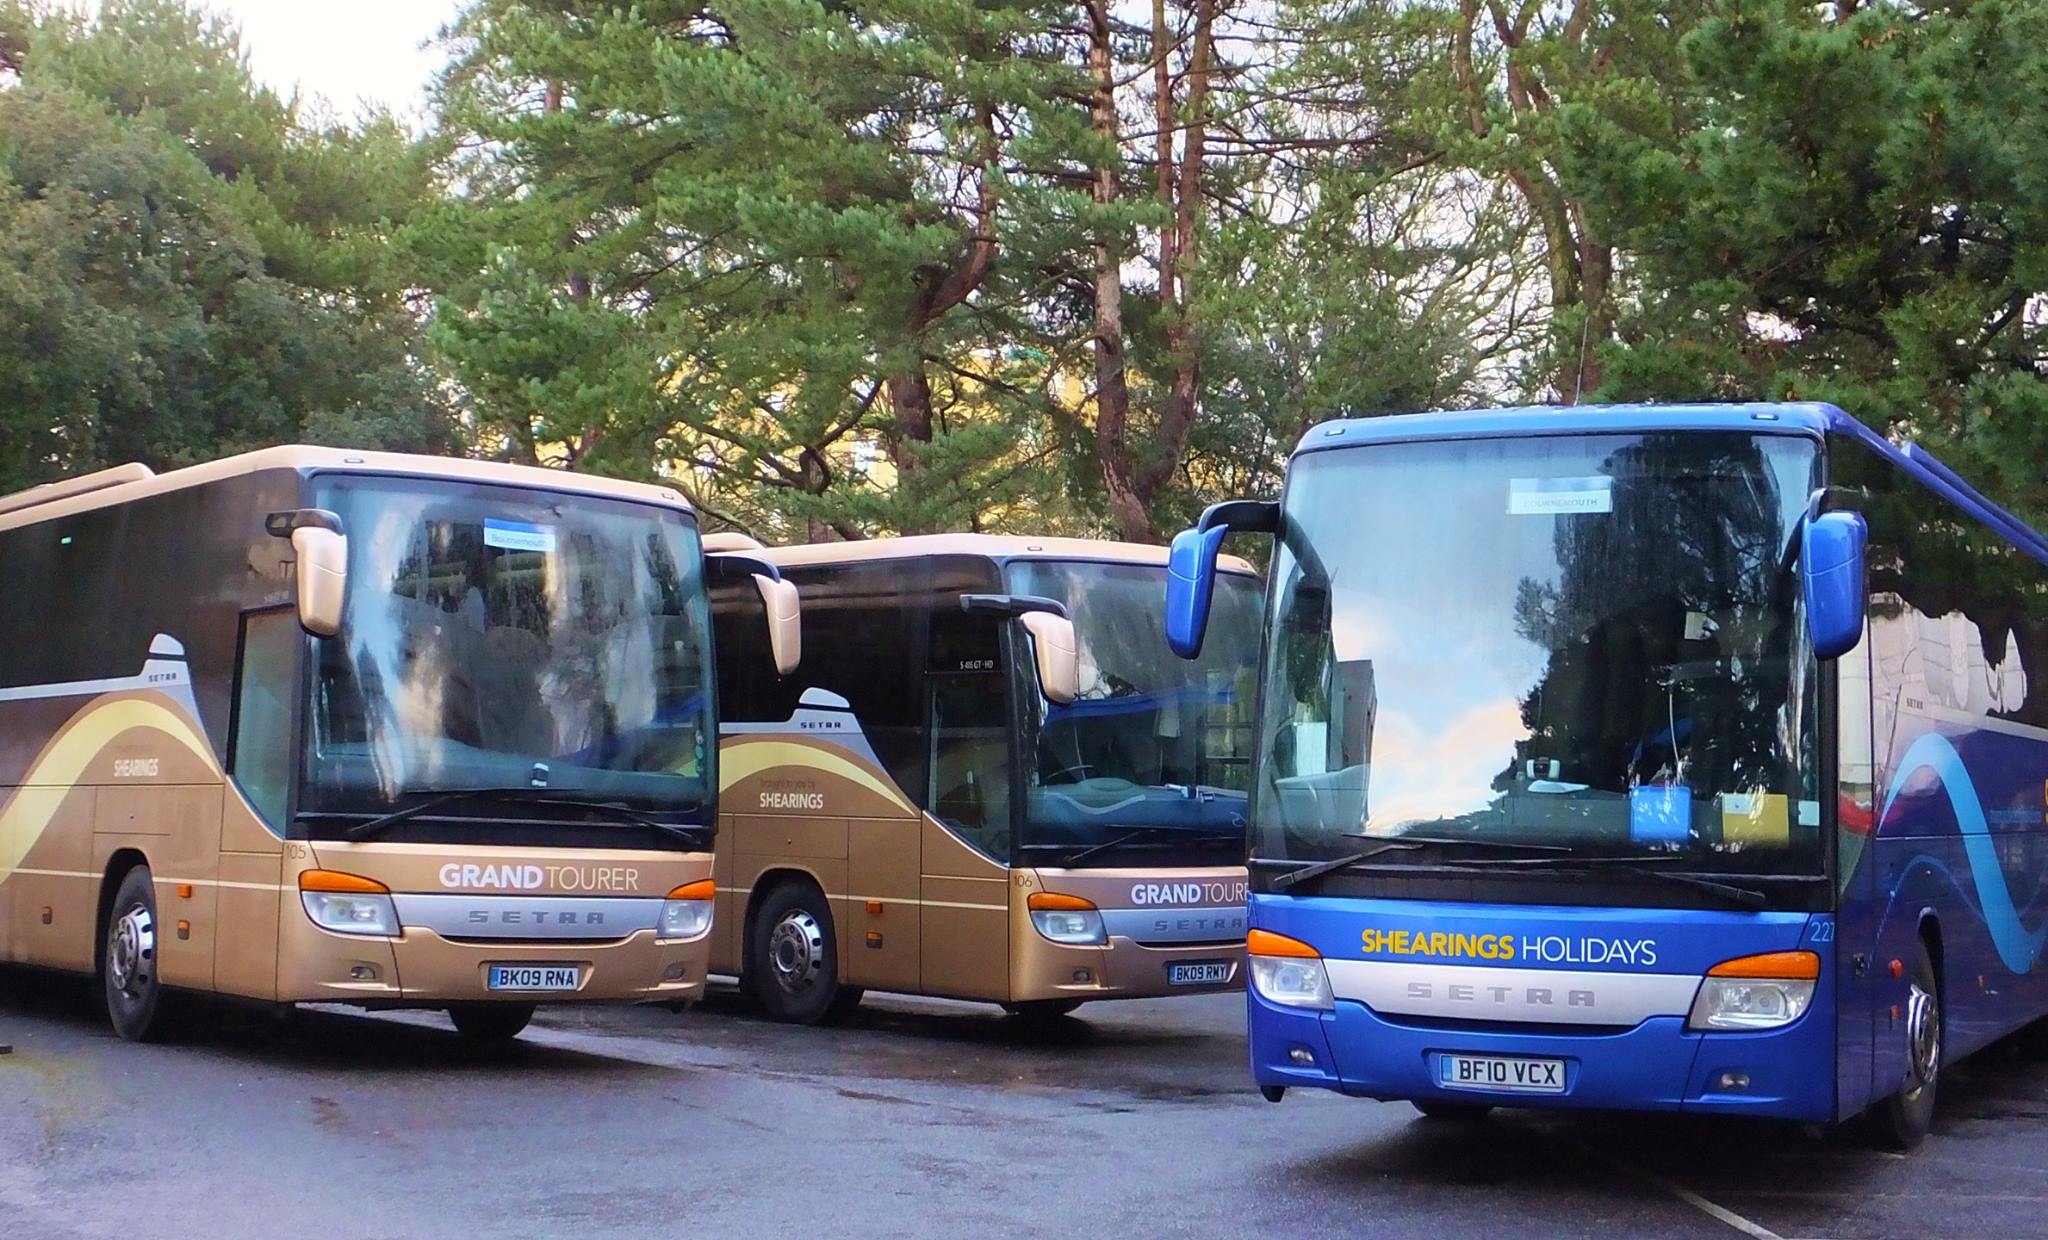 a group of four buses parked together in a parking lot